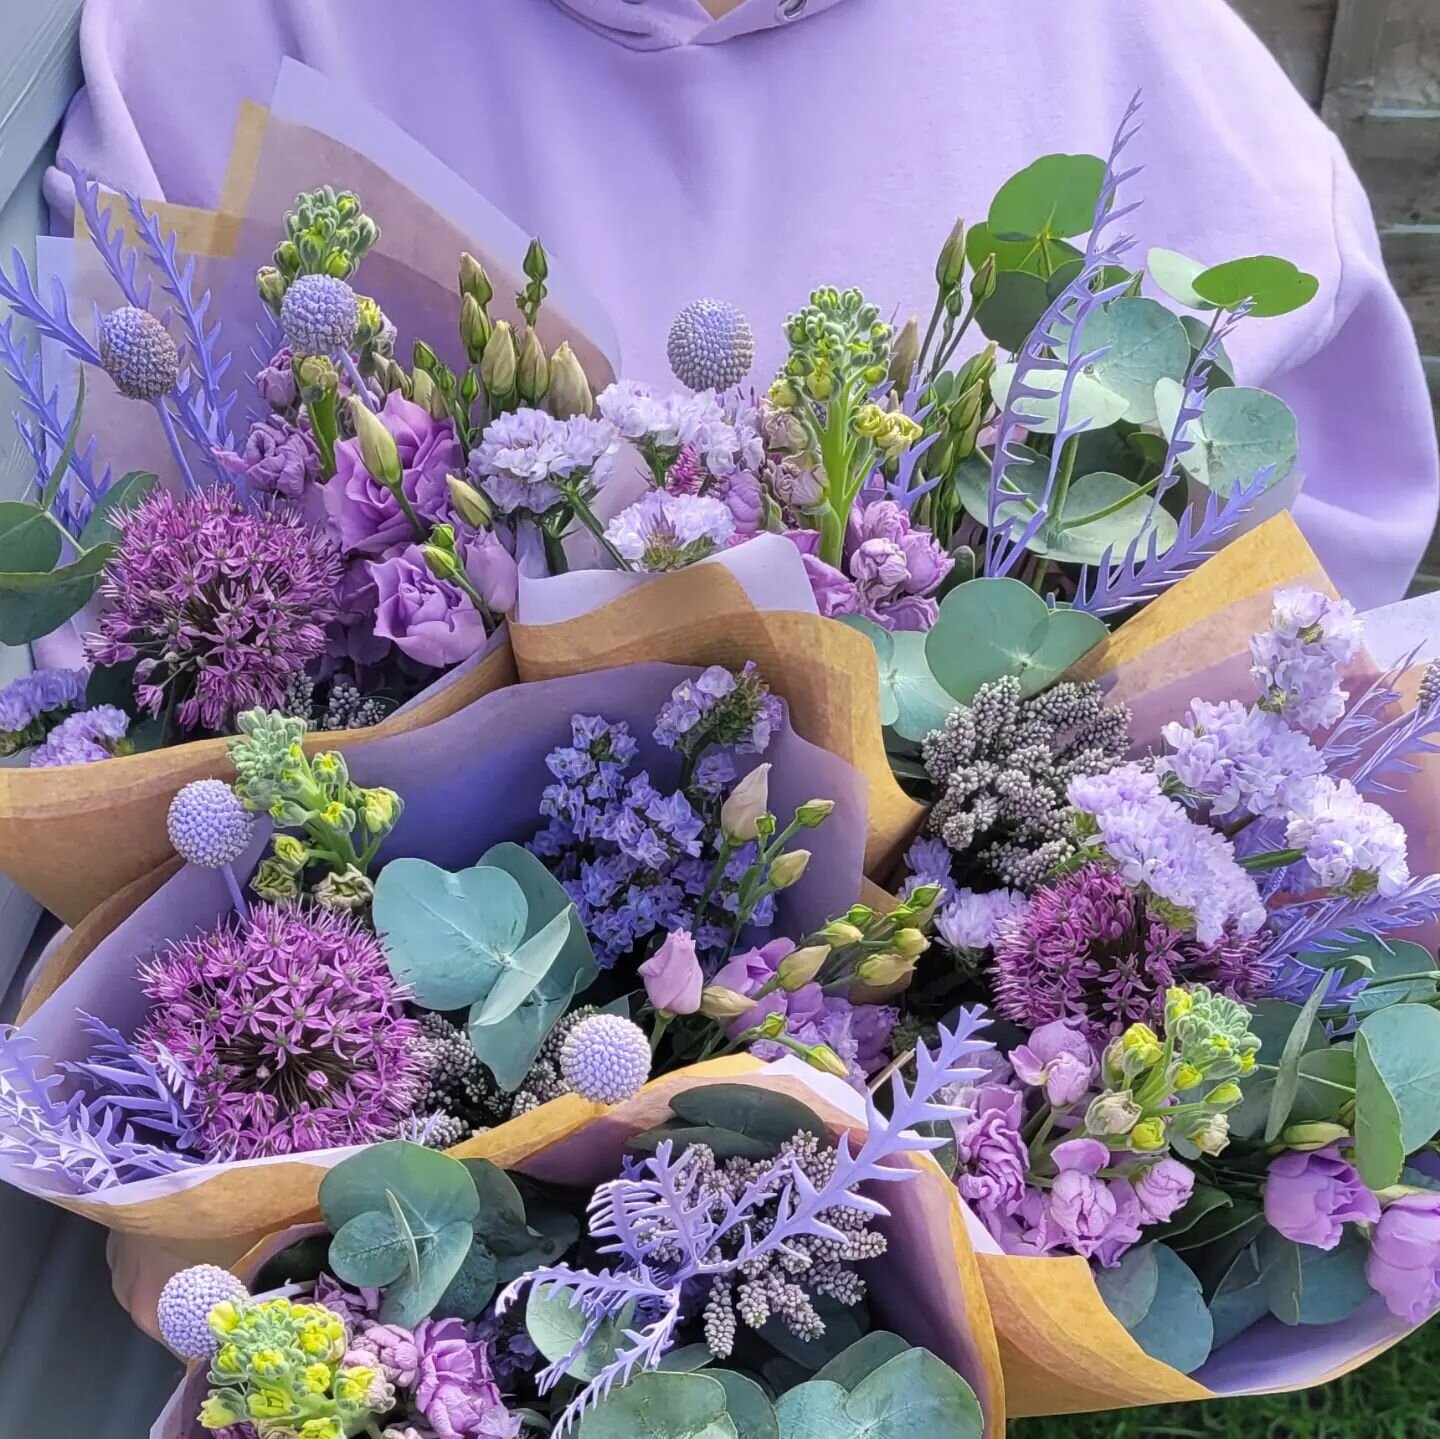 When the driver got the memo about this weeks bunches ! #matching #lilaclove #bunchesfortheweekend #shoplocal #lilacs #ivanhoe #allium #lisianthus #stocks #lilaccraspedia #statice #veronica